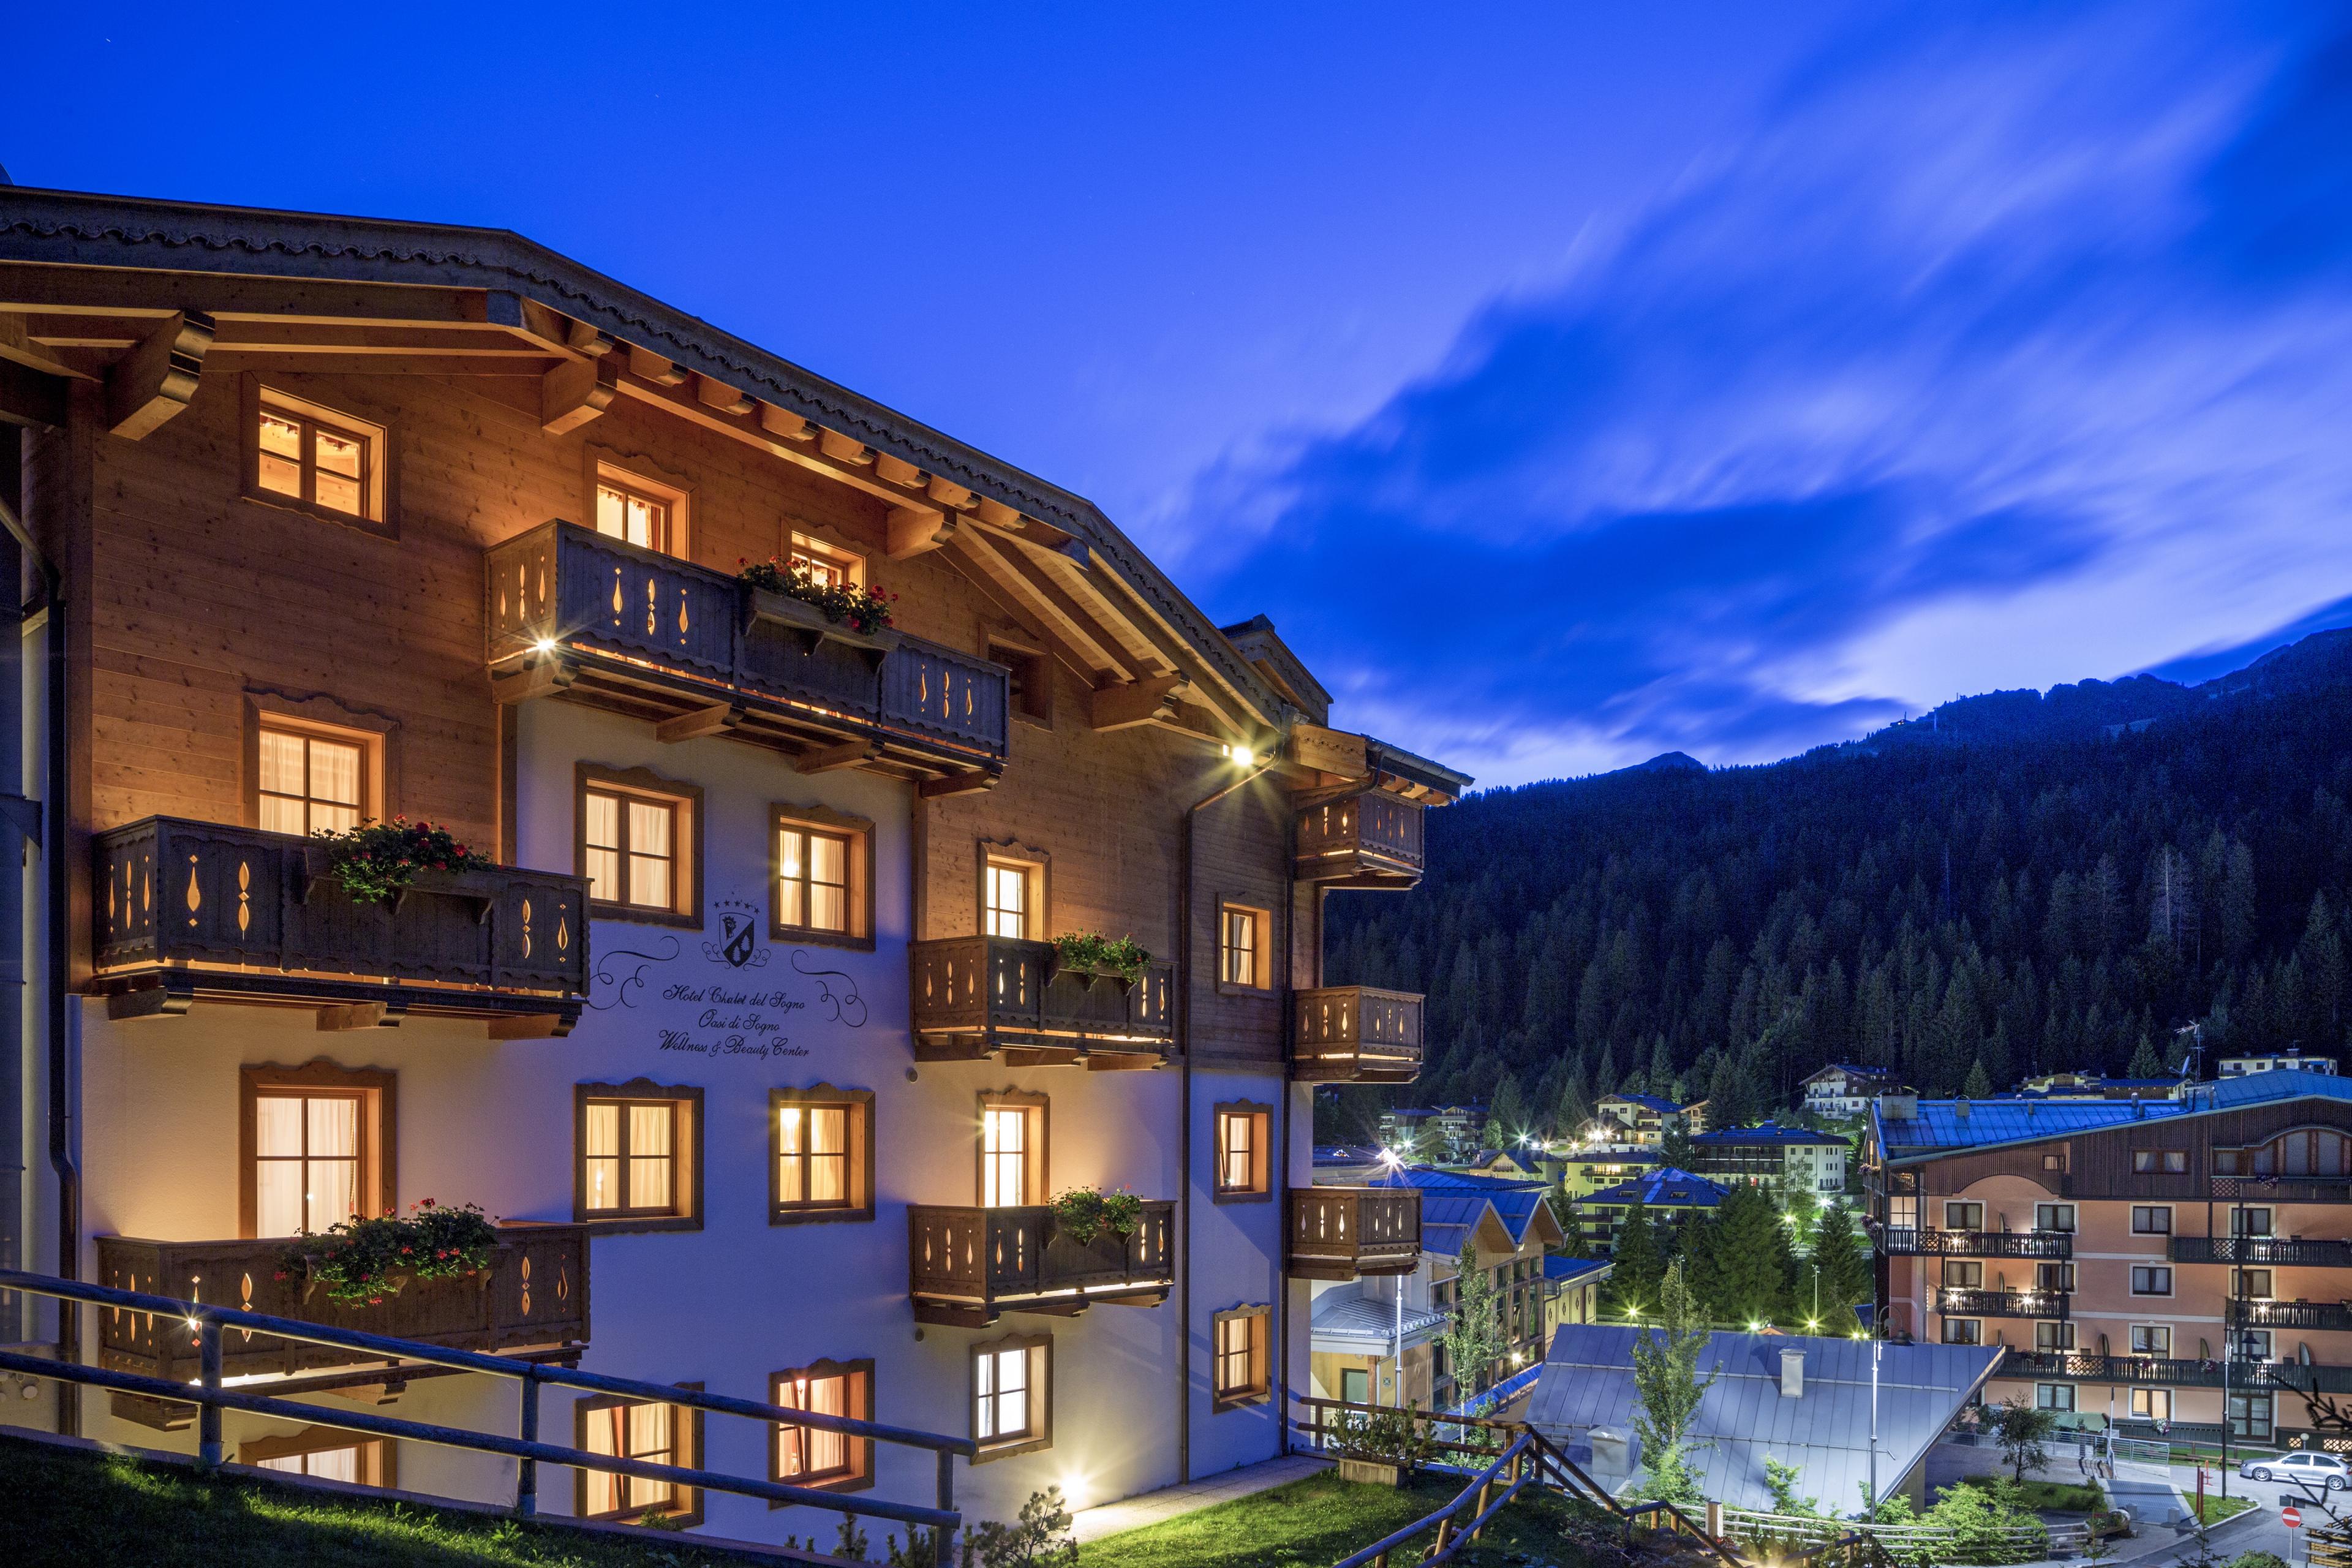 Exterior of hotel and dolomites mountains